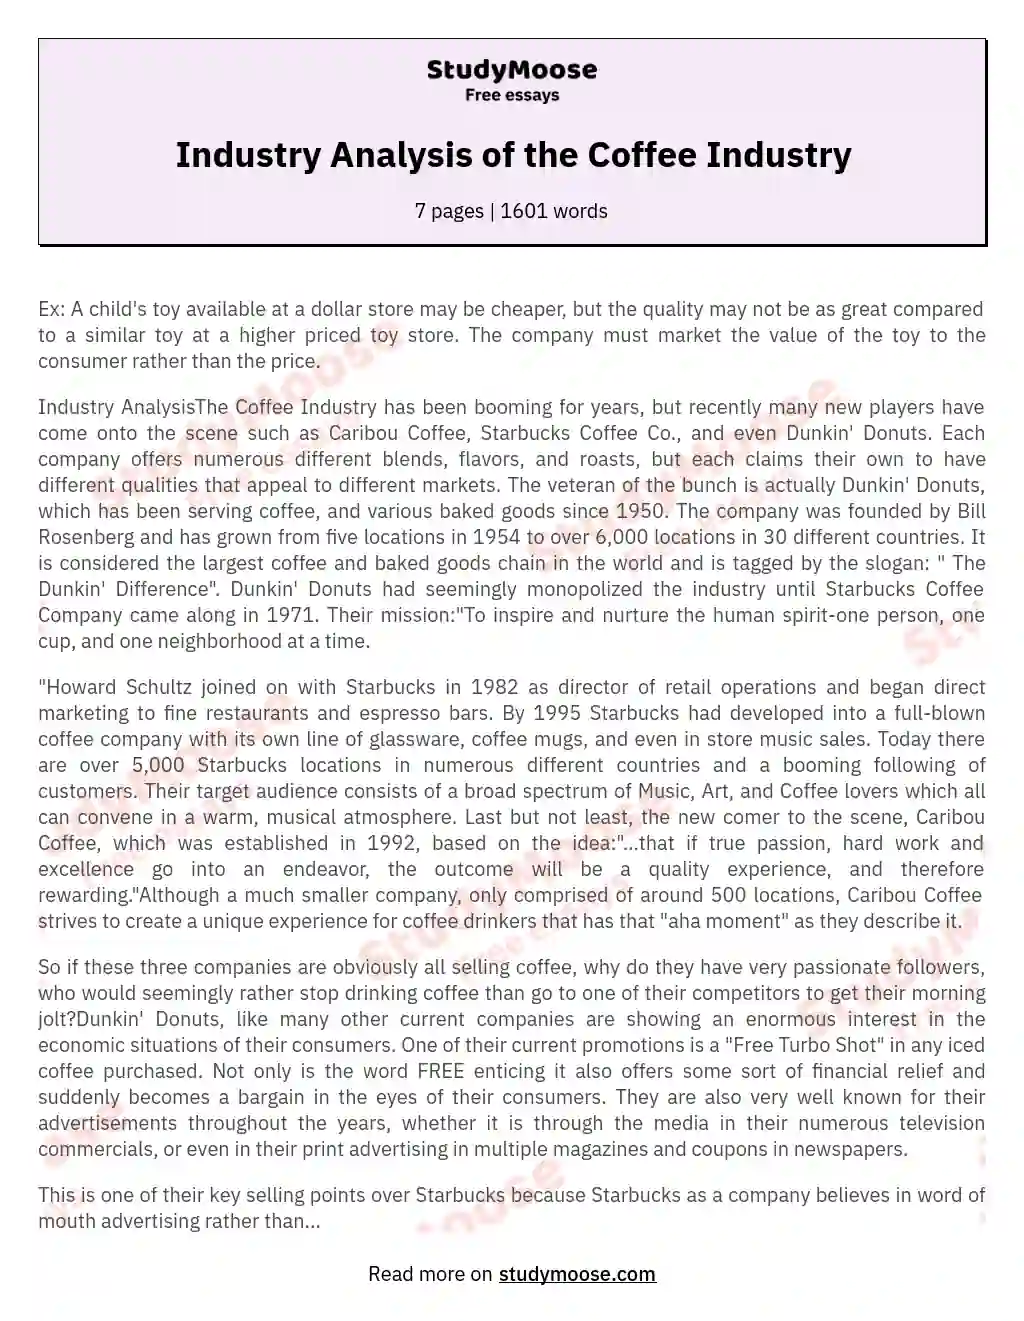 Industry Analysis of the Coffee Industry